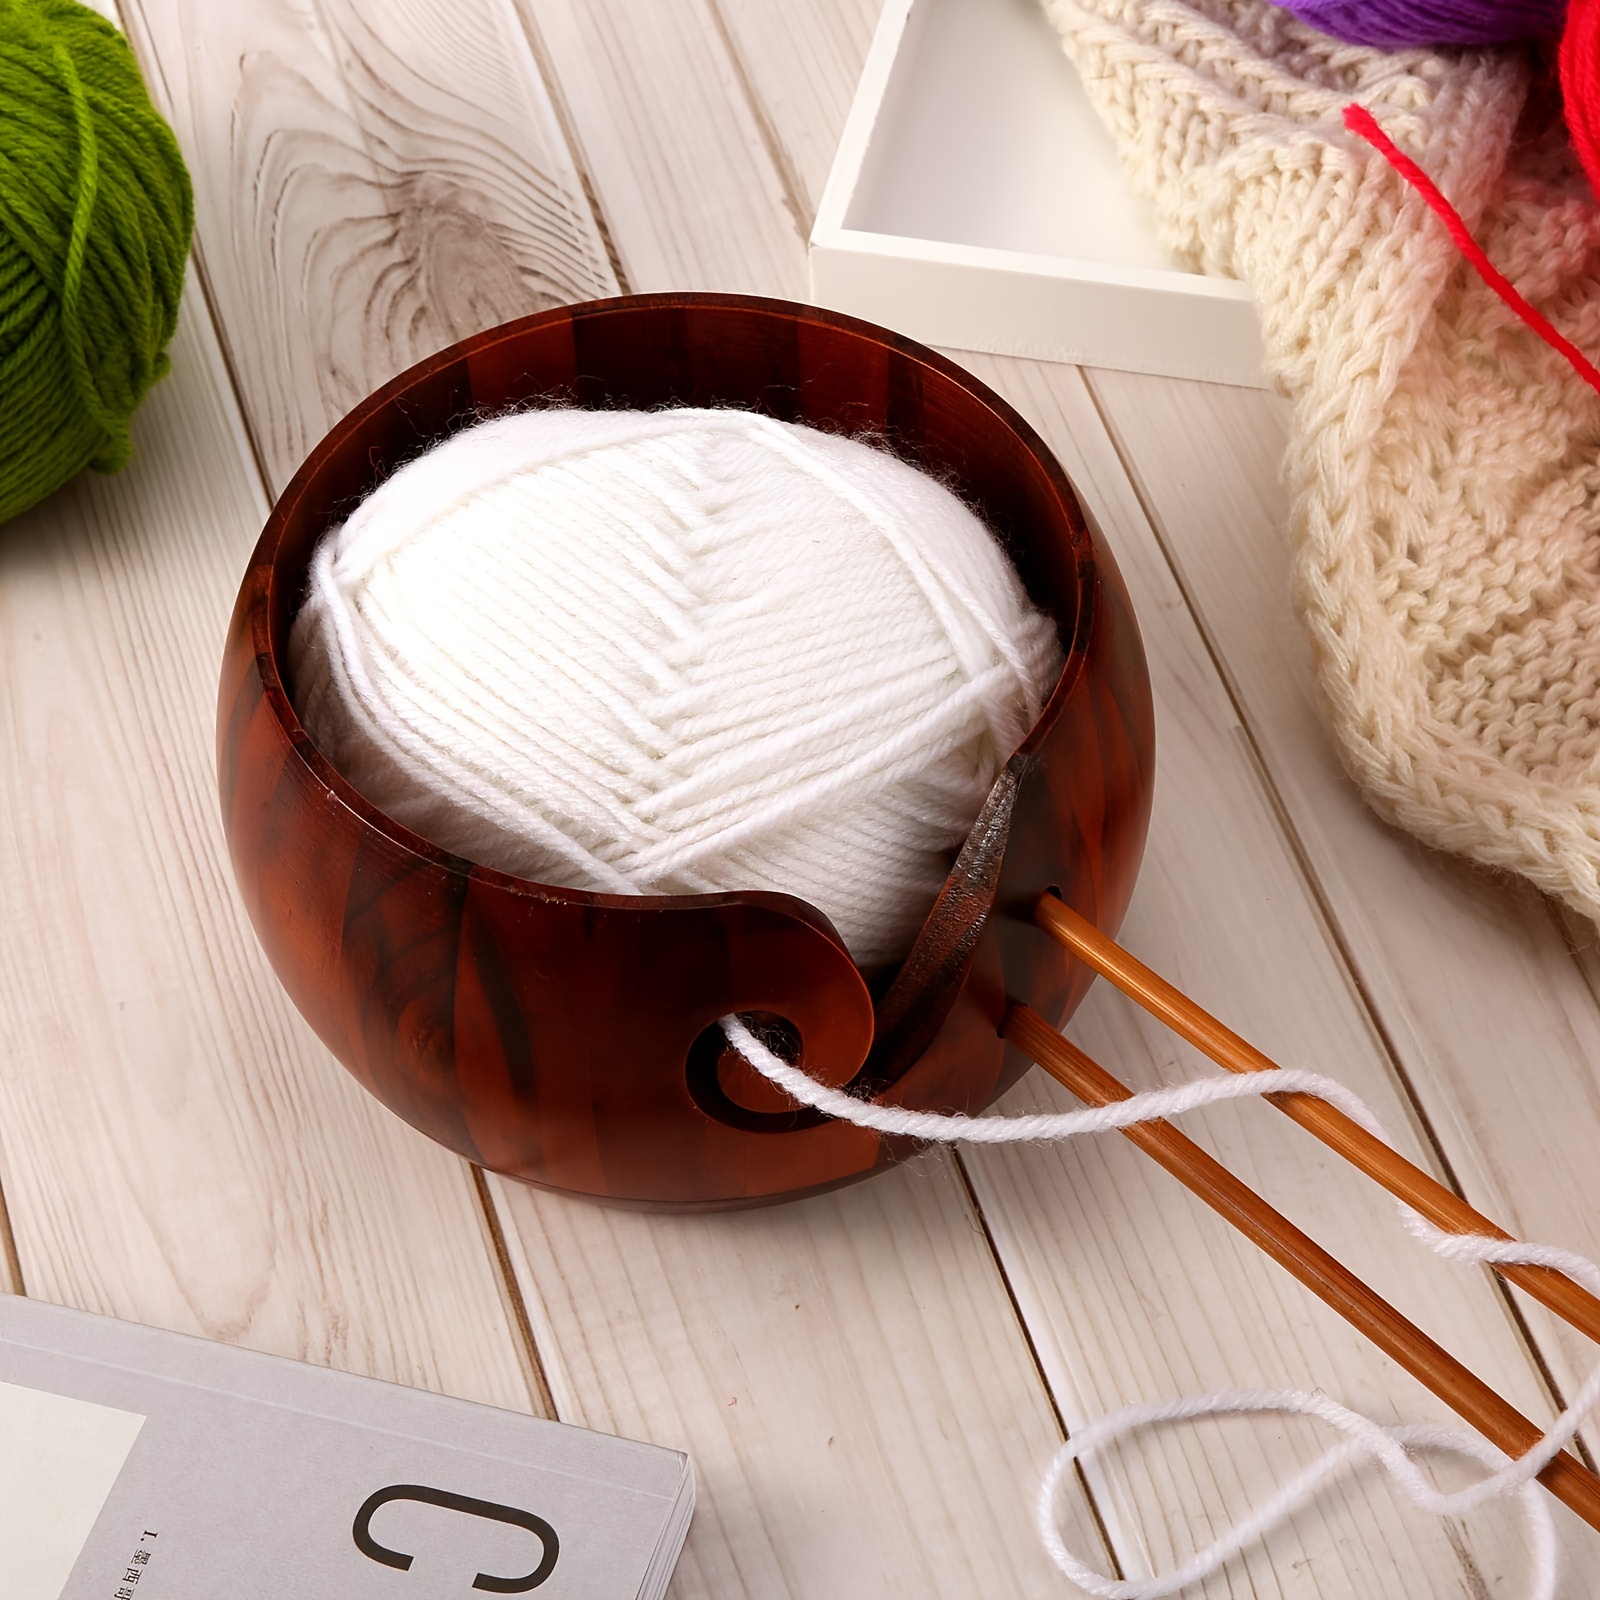 Little World Yarn Bowl - Wooden Yarn Bowls for Crocheting with Holes,  Preventing Slipping and Tangles, Handmade Craft Knitting Bowl Mothers Day  Gift